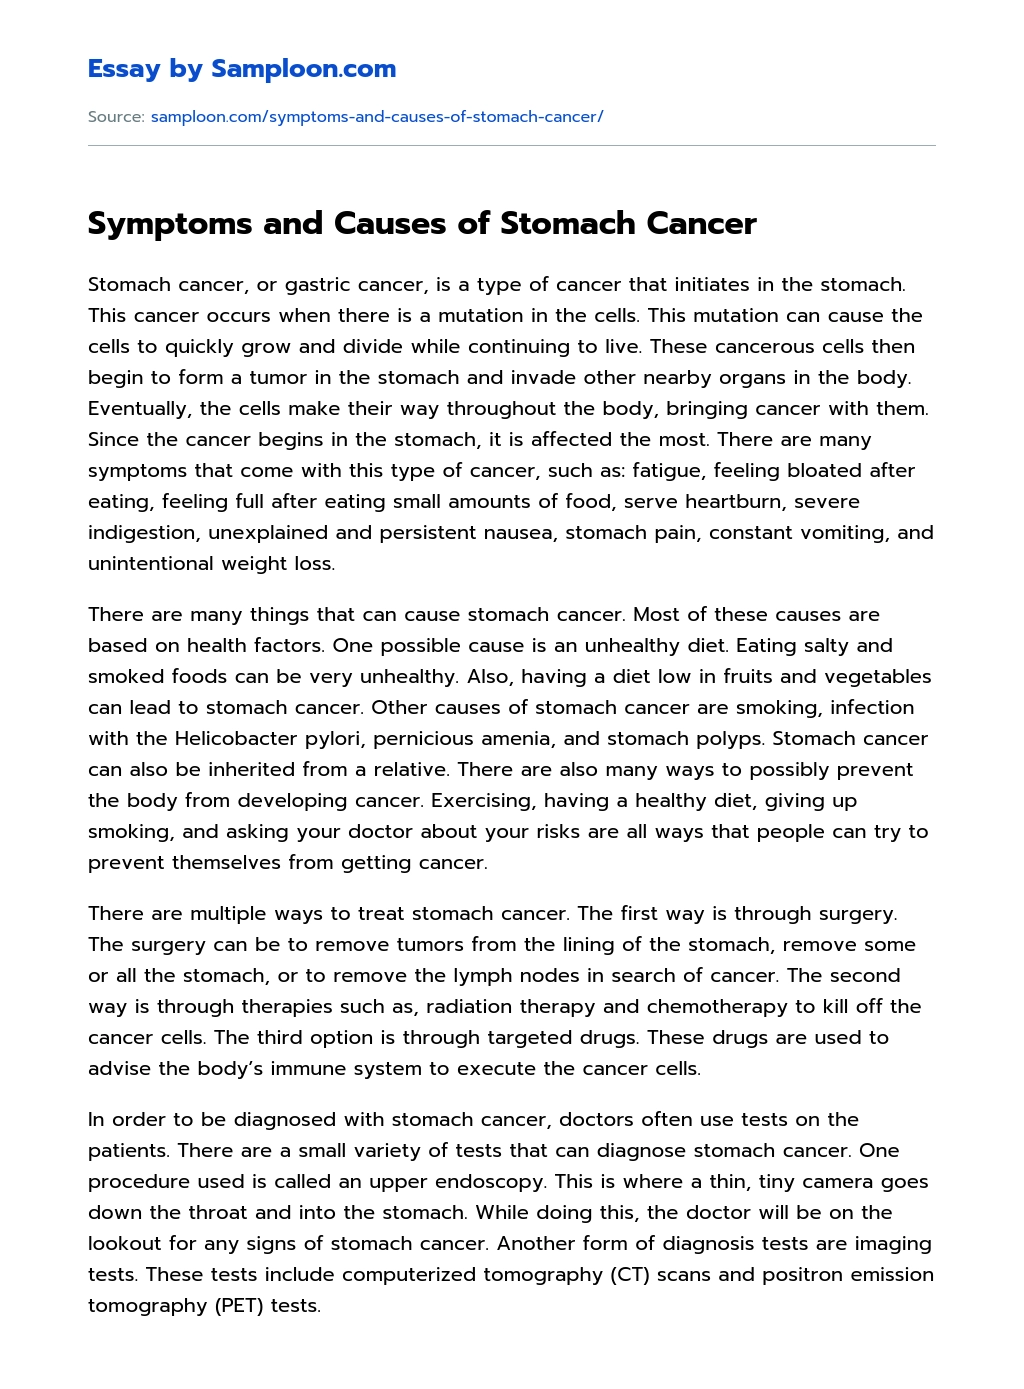 Symptoms and Causes of Stomach Cancer  essay